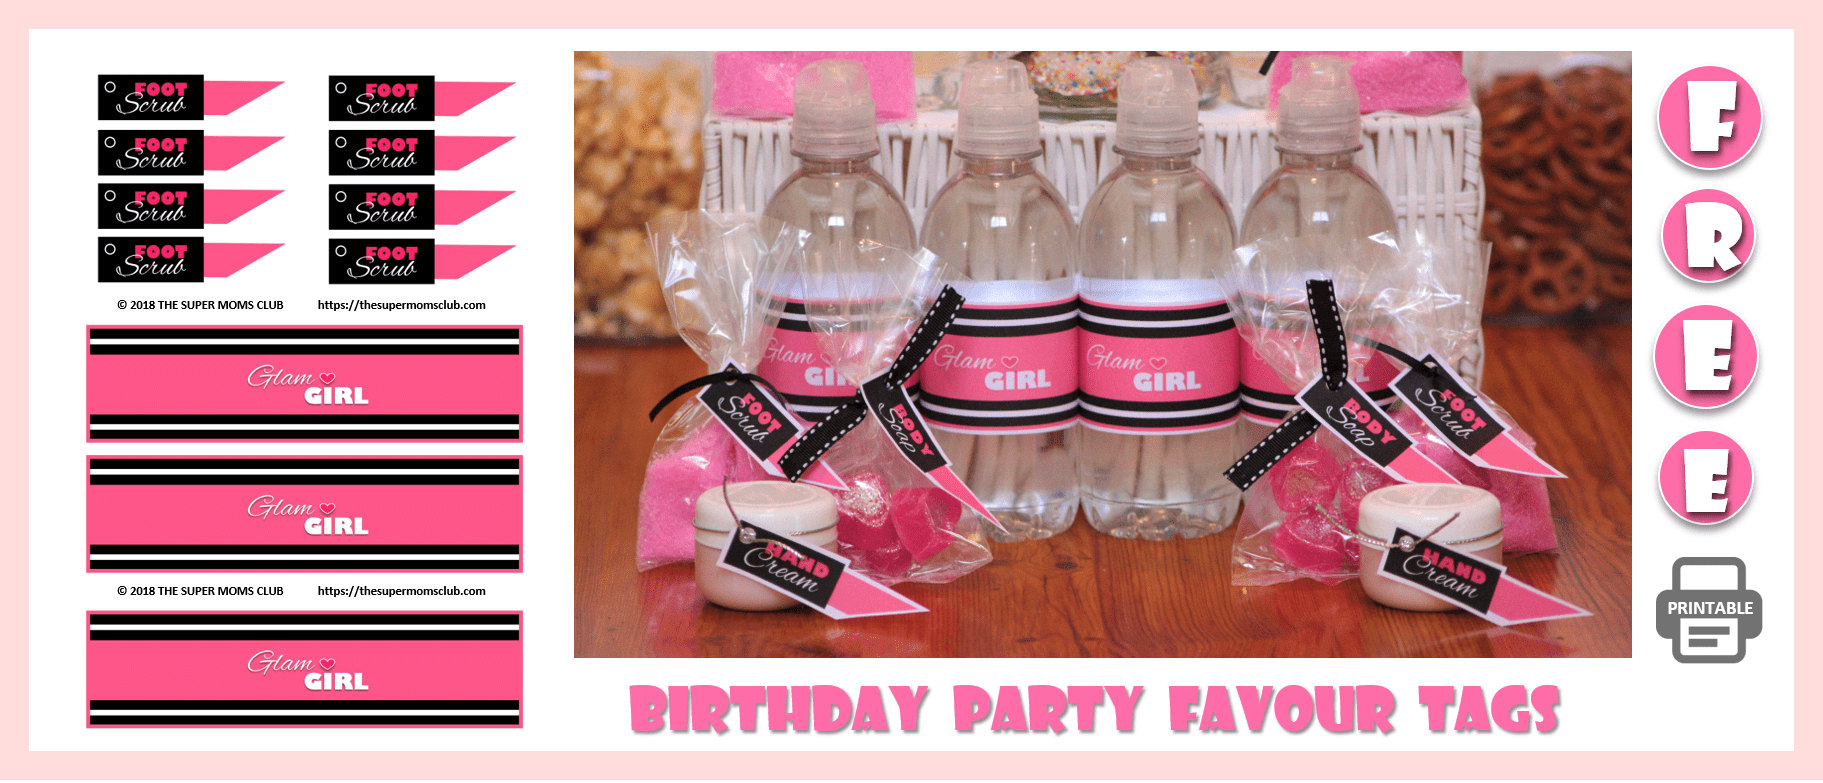 Make-up Themed Birthday Party FREE PRINTABLE Favour Tags - The Super Moms Club